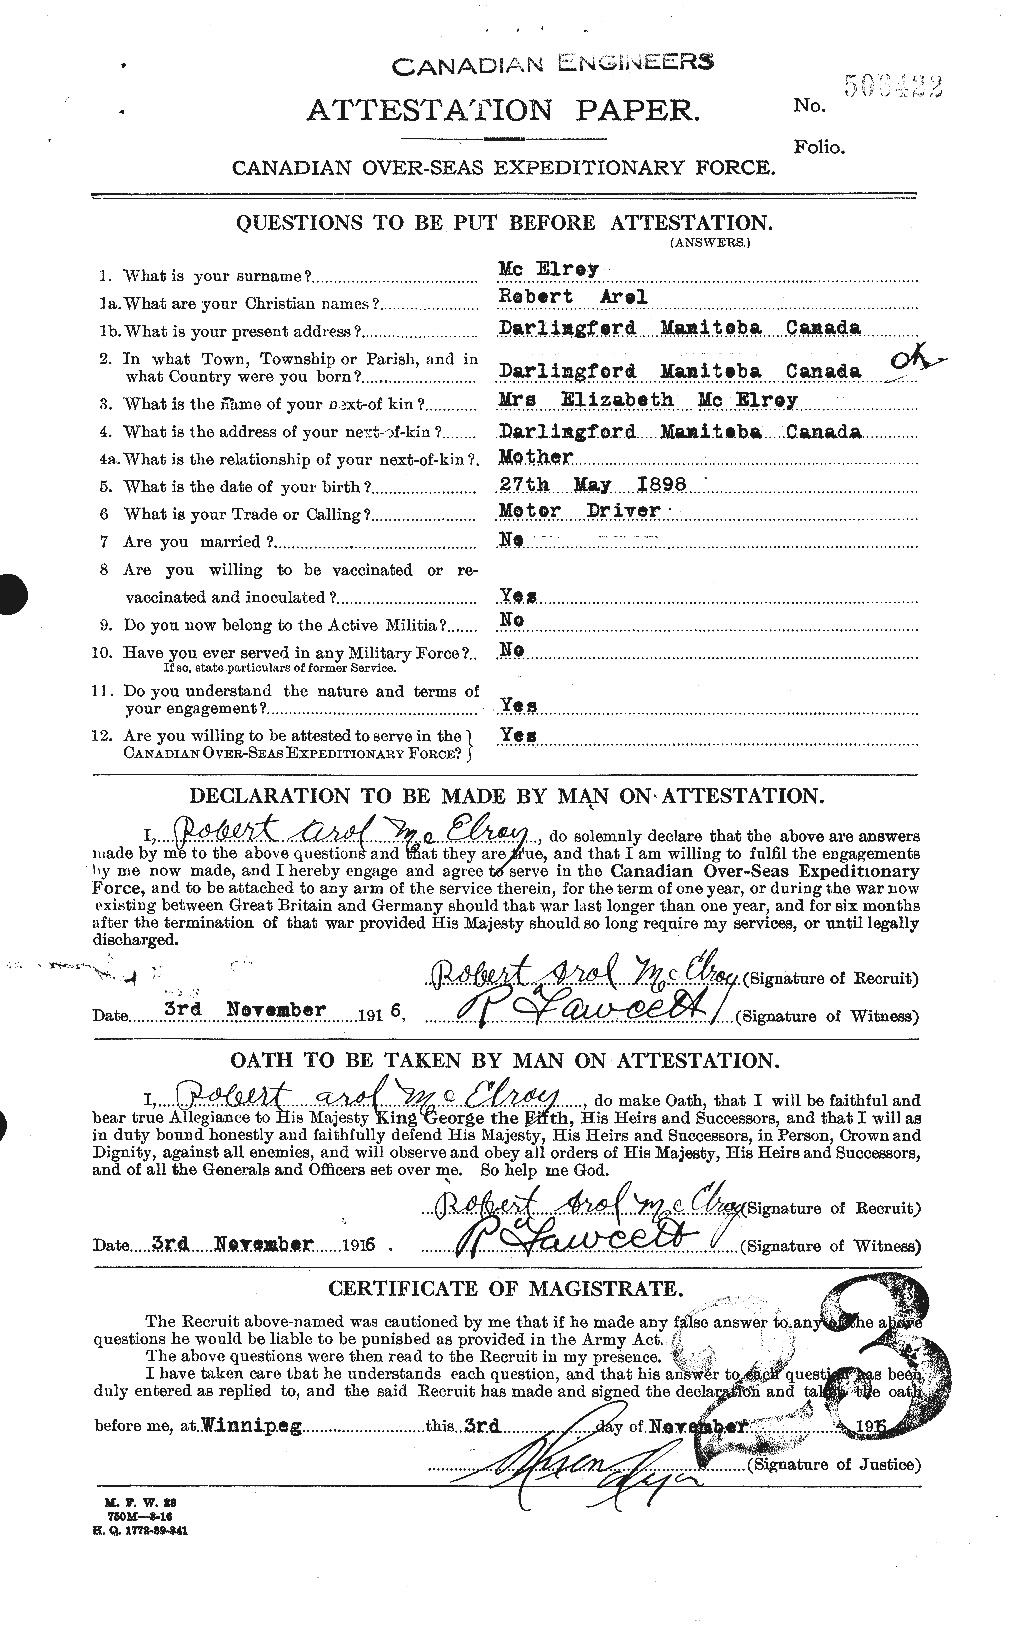 Personnel Records of the First World War - CEF 522074a